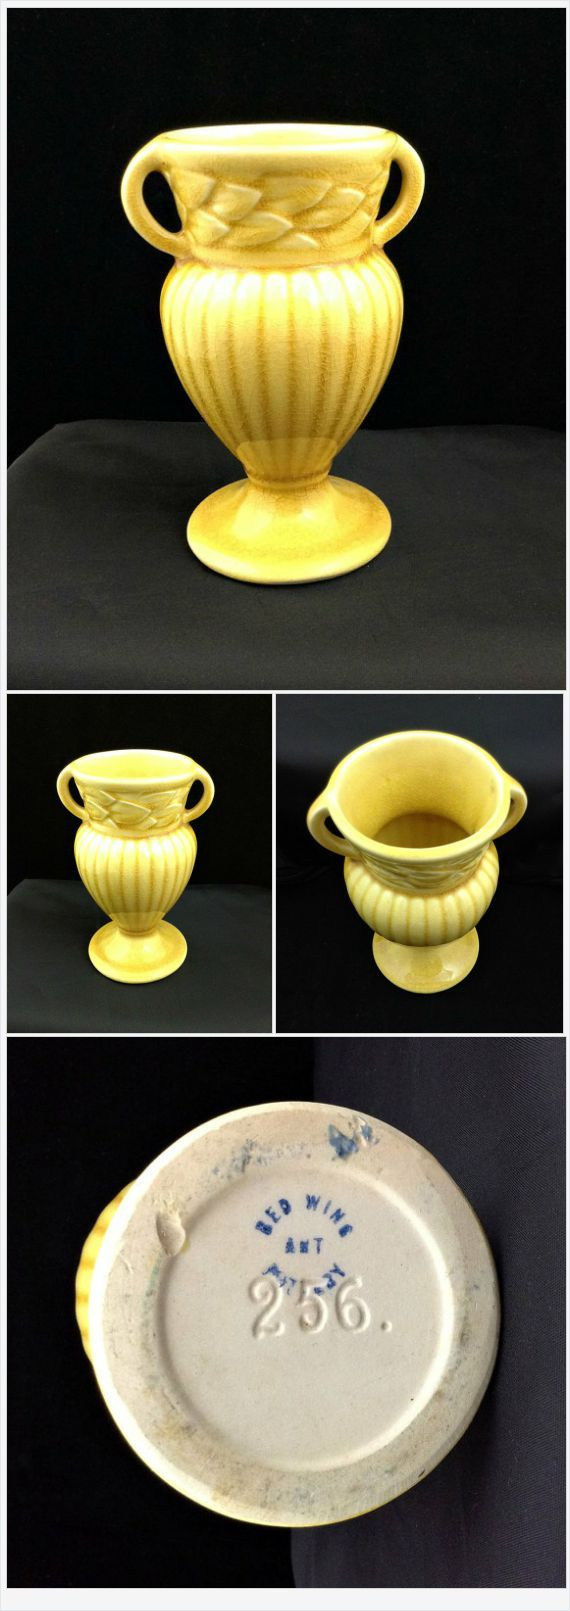 red wing vases antique of red wing art pottery gloss yellow pedestal footed vase shape no 256 inside red wing art pottery gloss yellow pedestal footed vase shape no 256 vintage